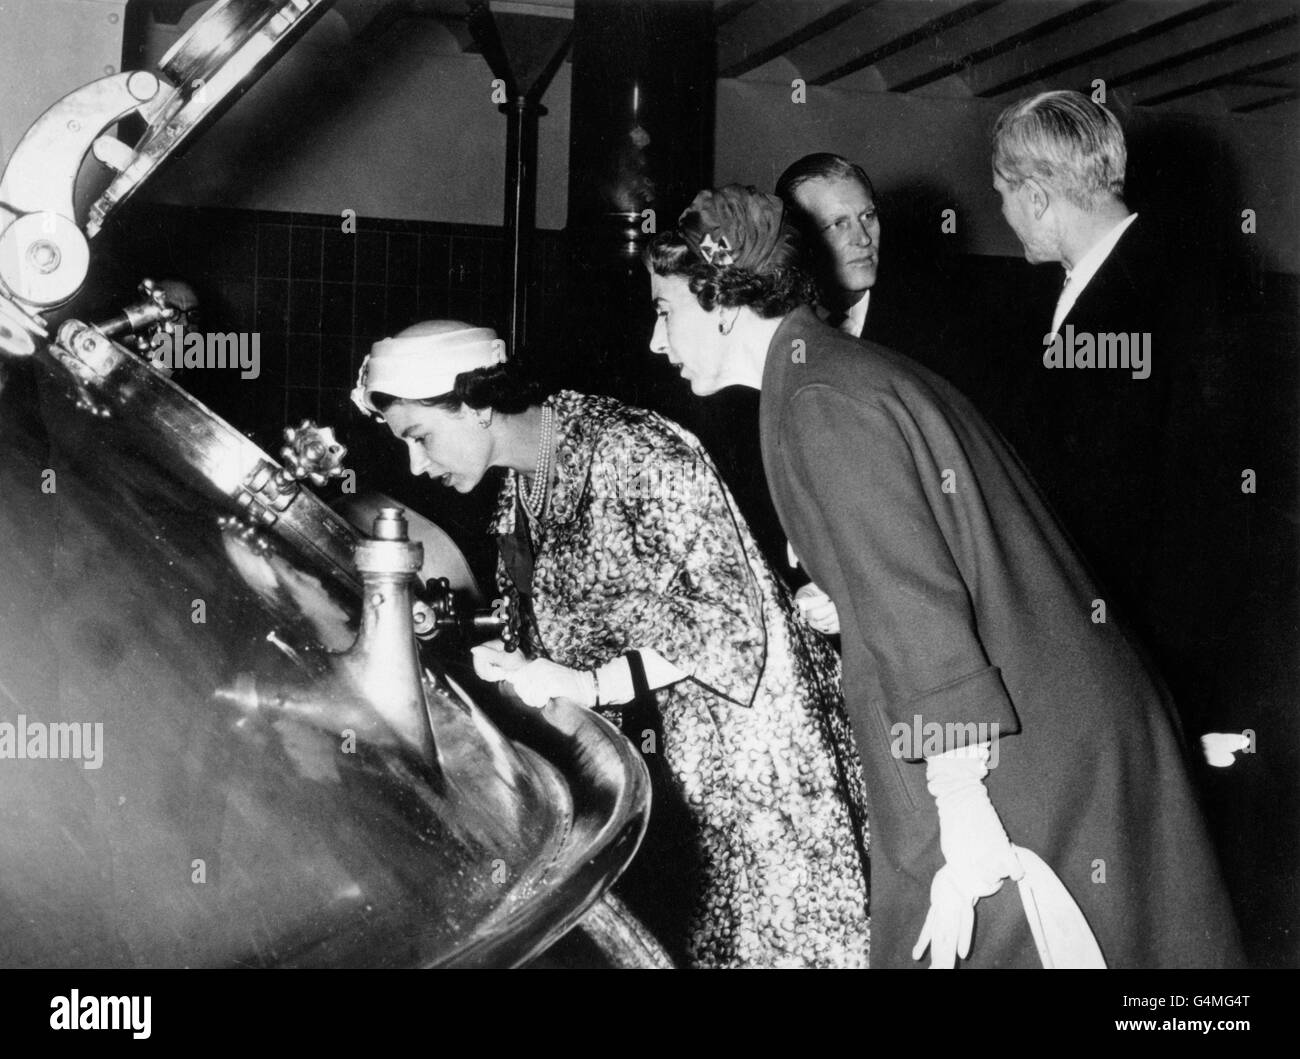 Two Queens - Elizabeth II of Great Britain and Ingrid of Denmark, right, peer into one of the huge vats at the Carlsberg Brewery in Copenhagen. Stock Photo